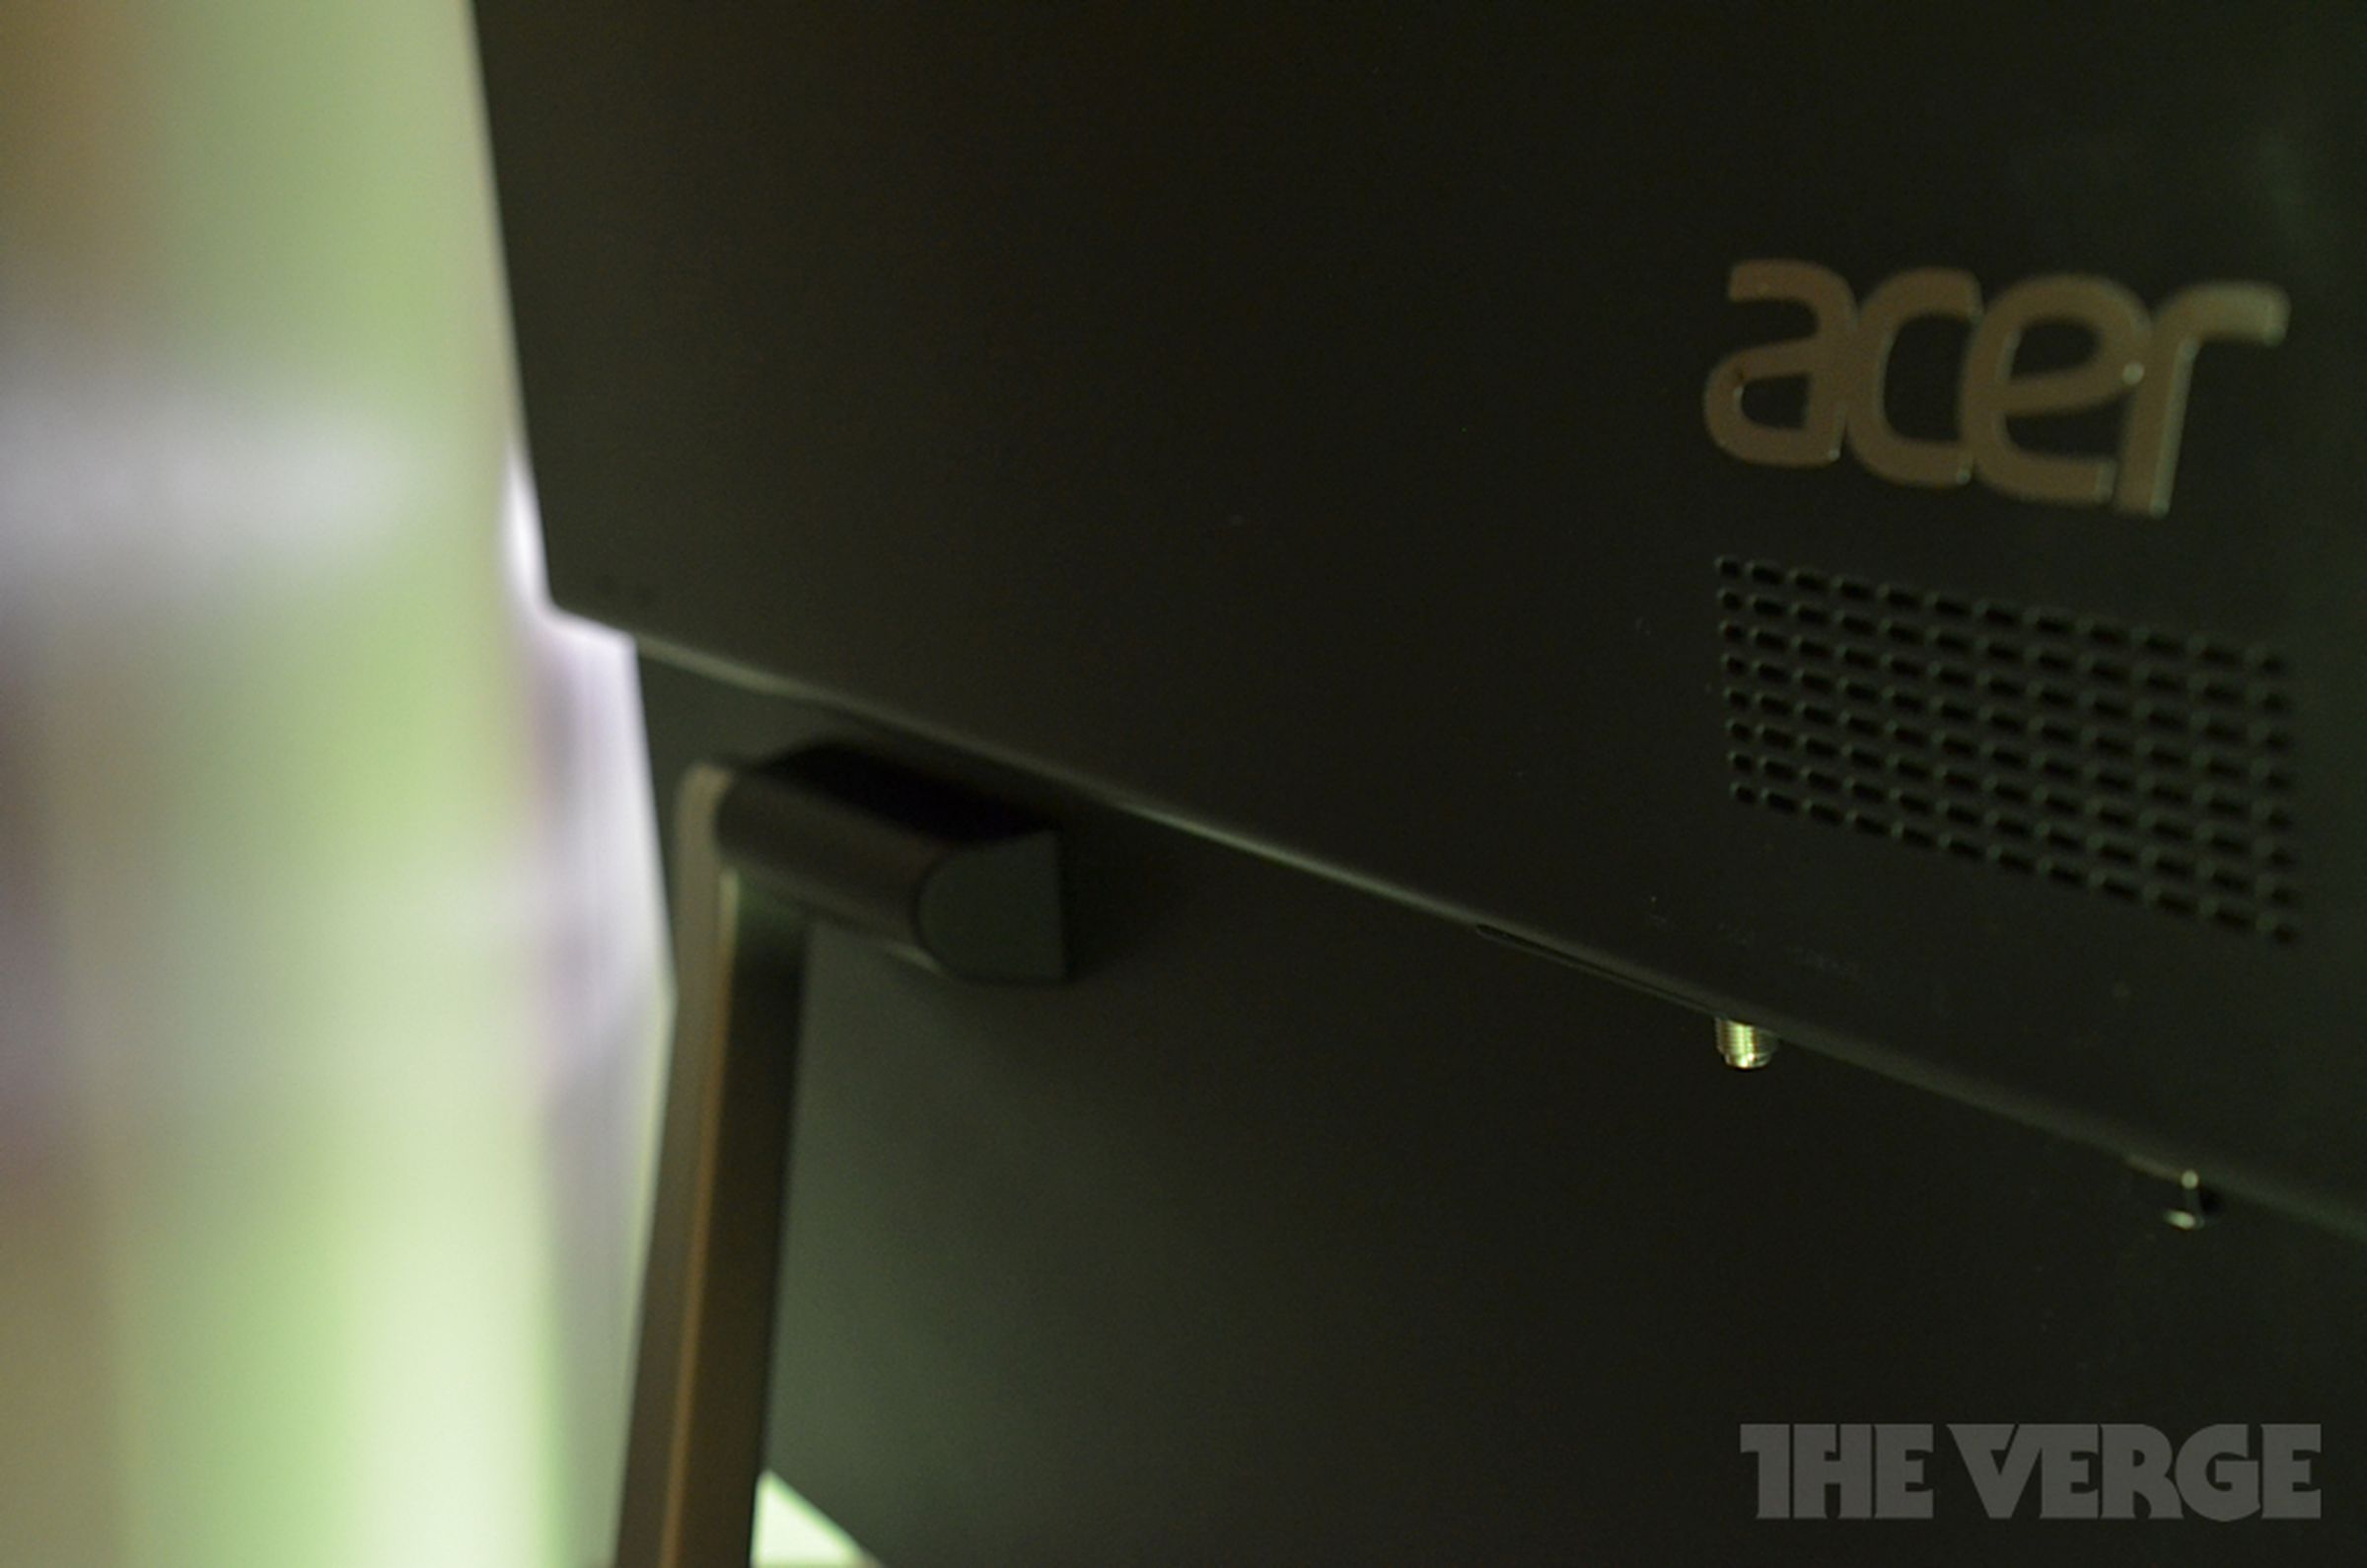 Acer Aspire Z7871 AIO hands-on pictures